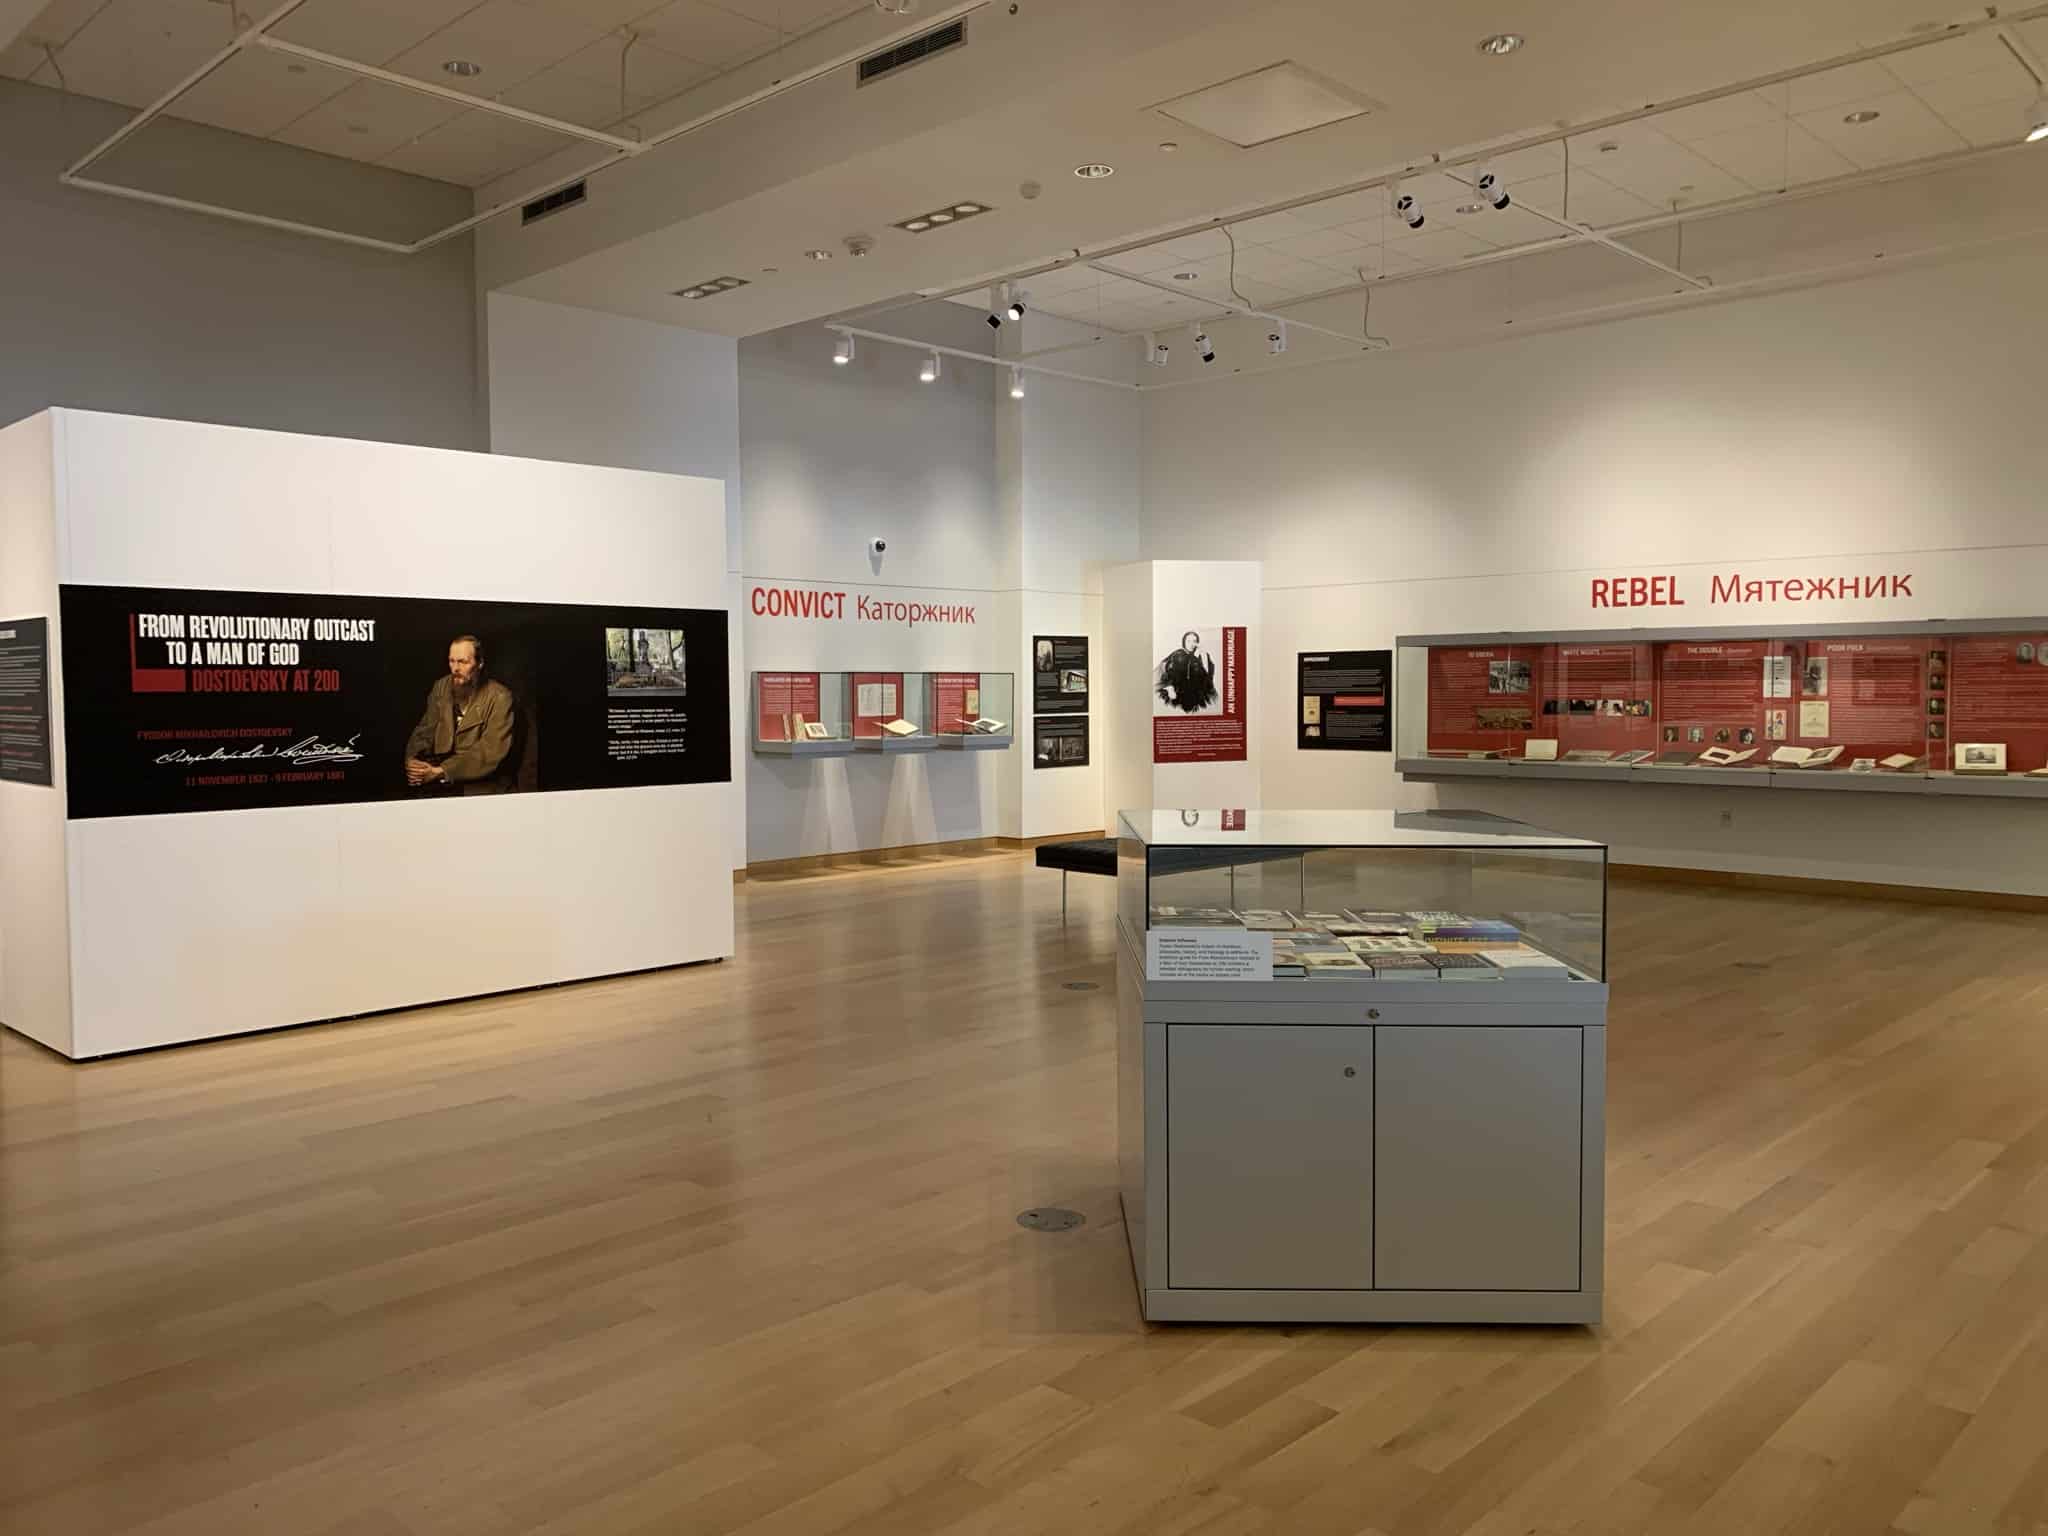 Wide view of the Main Library Gallery featuring a poster with the exhibit title on it. Cases hold books and other objects for display.